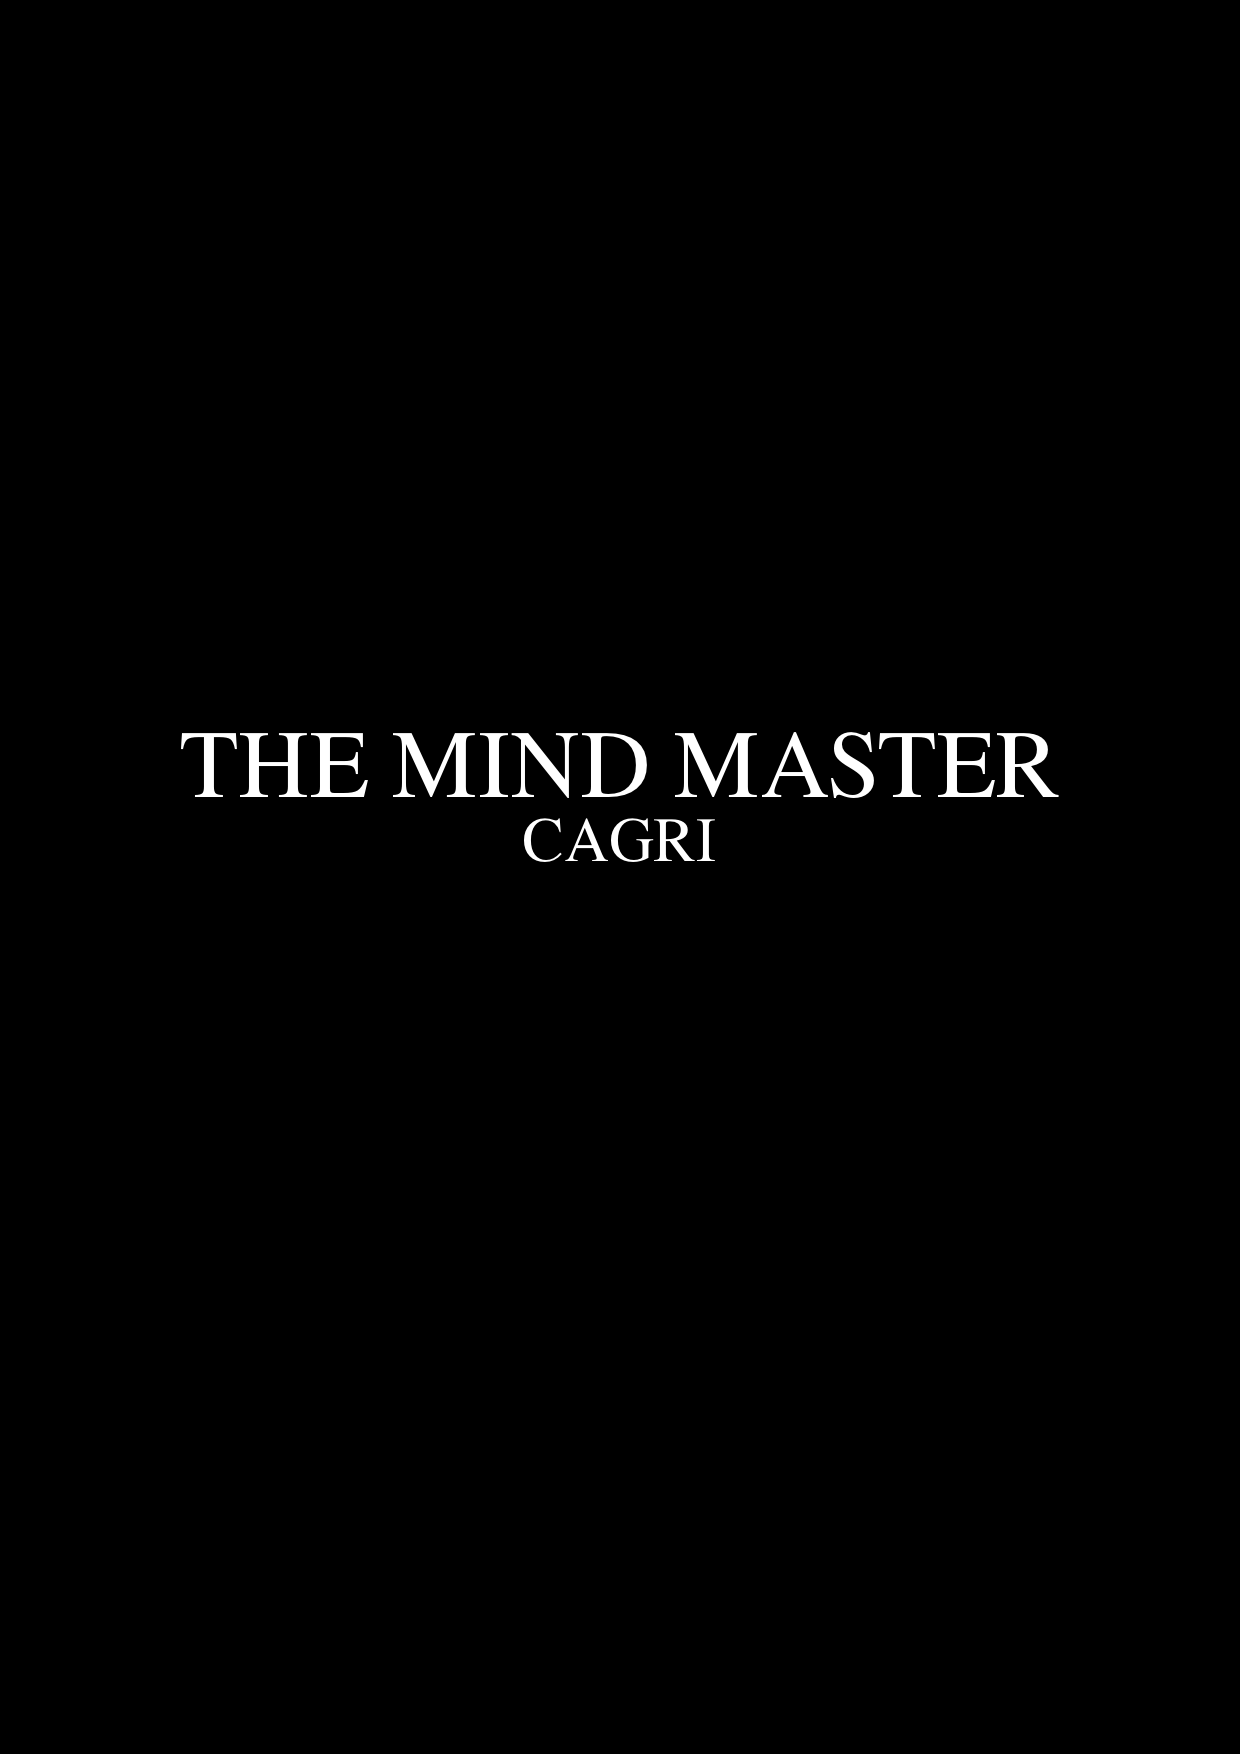 The Mind Master by Cagri